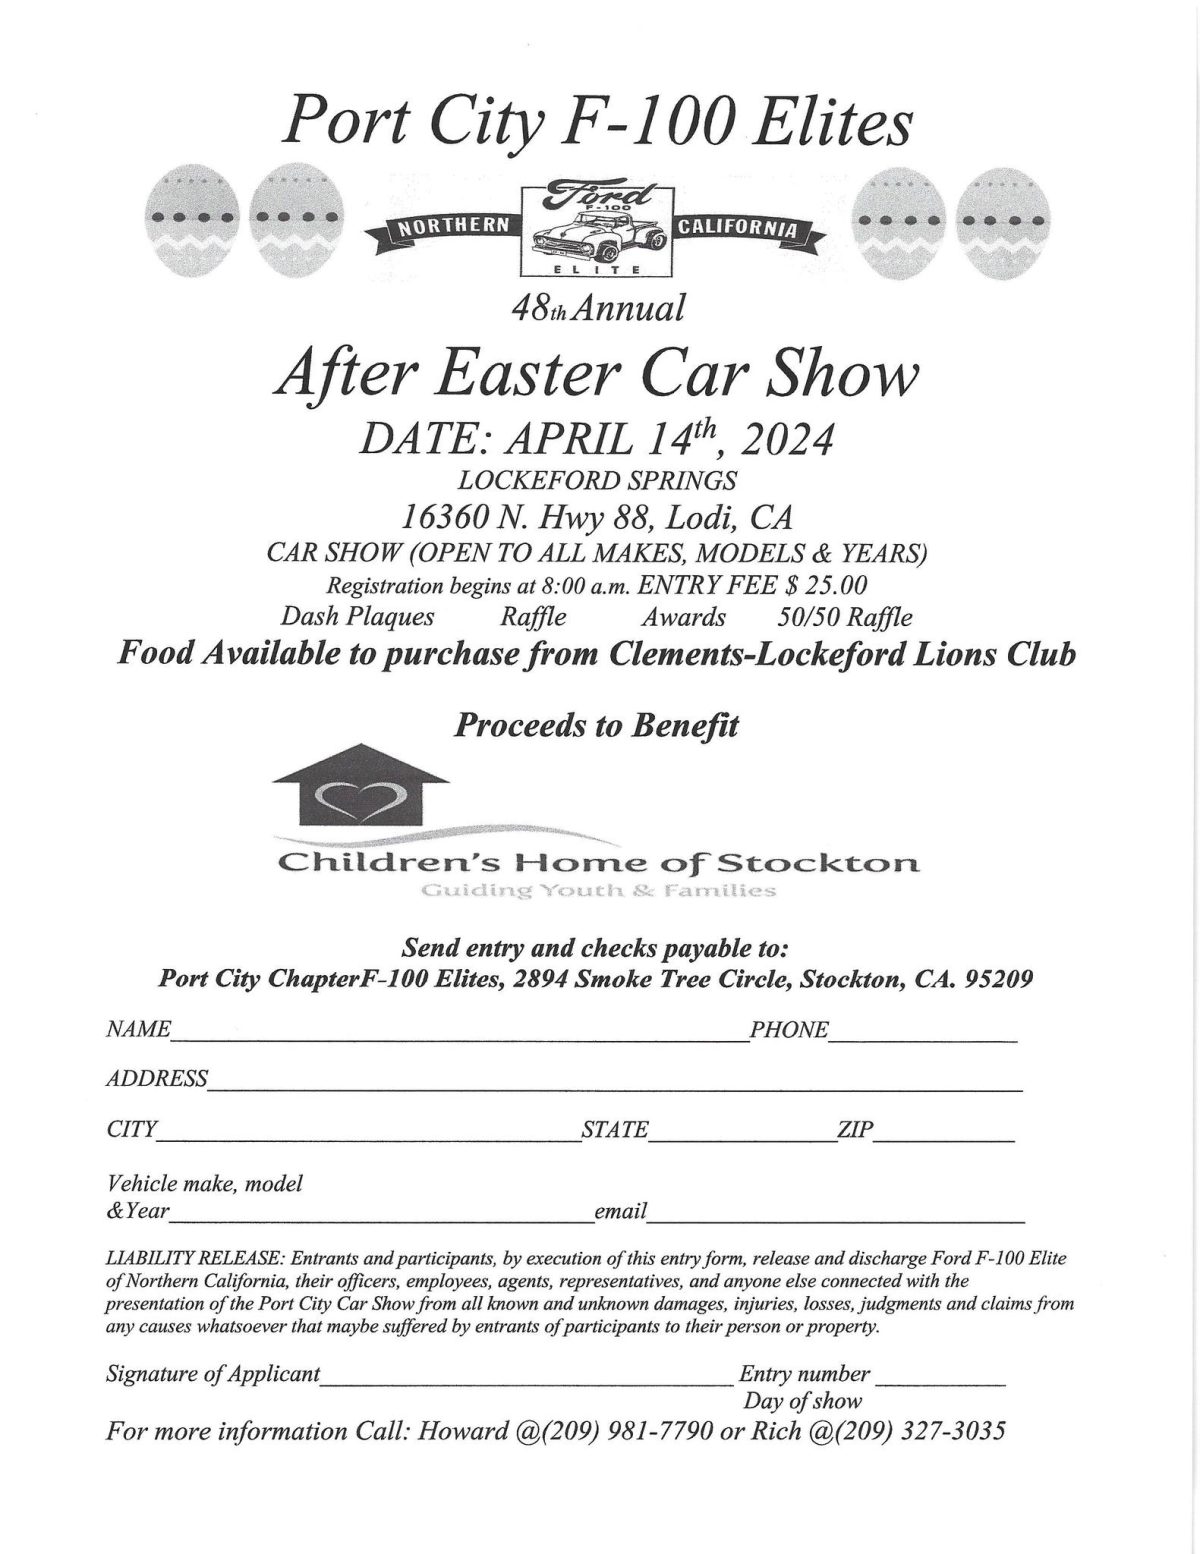 After Easter Car Show